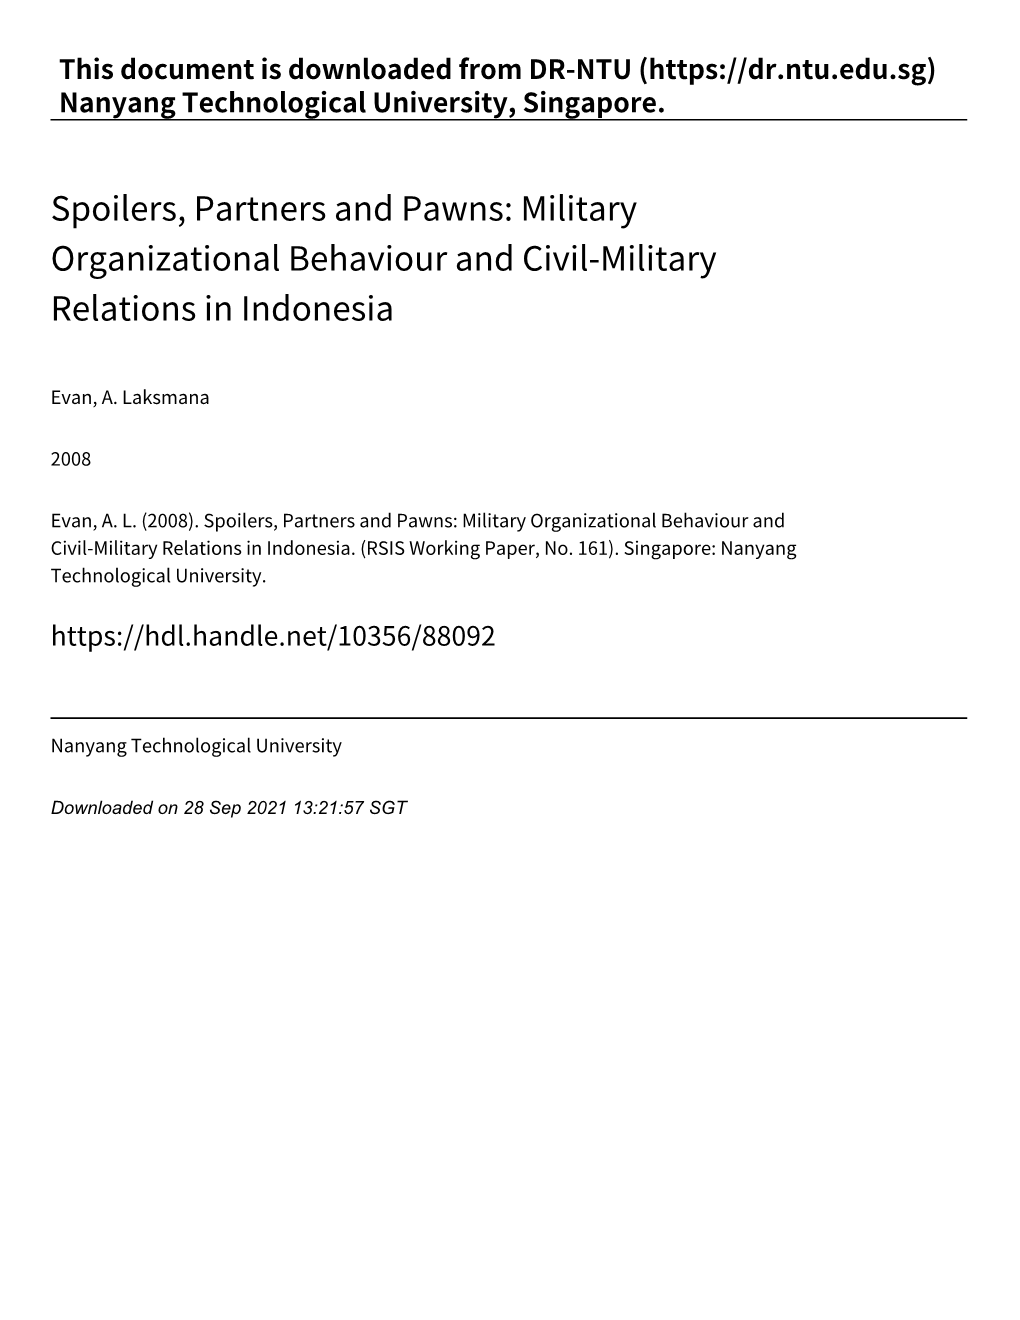 Military Organizational Behaviour and Civil‑Military Relations in Indonesia